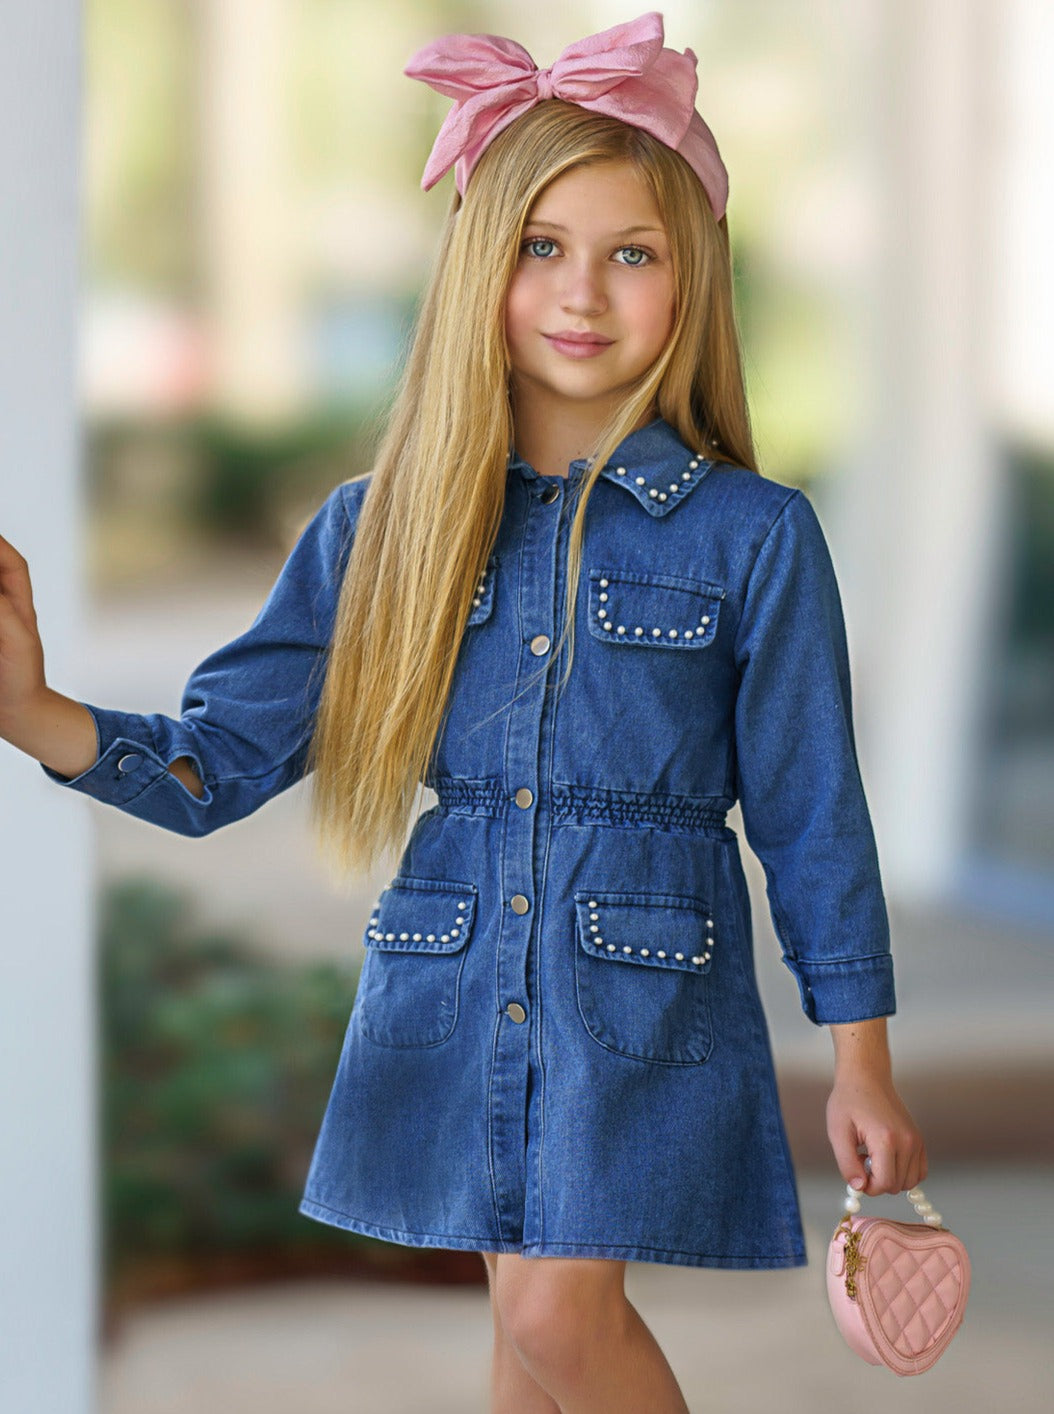 Mia Belle Girls Denim Dress | Back To School Outfits For Kids